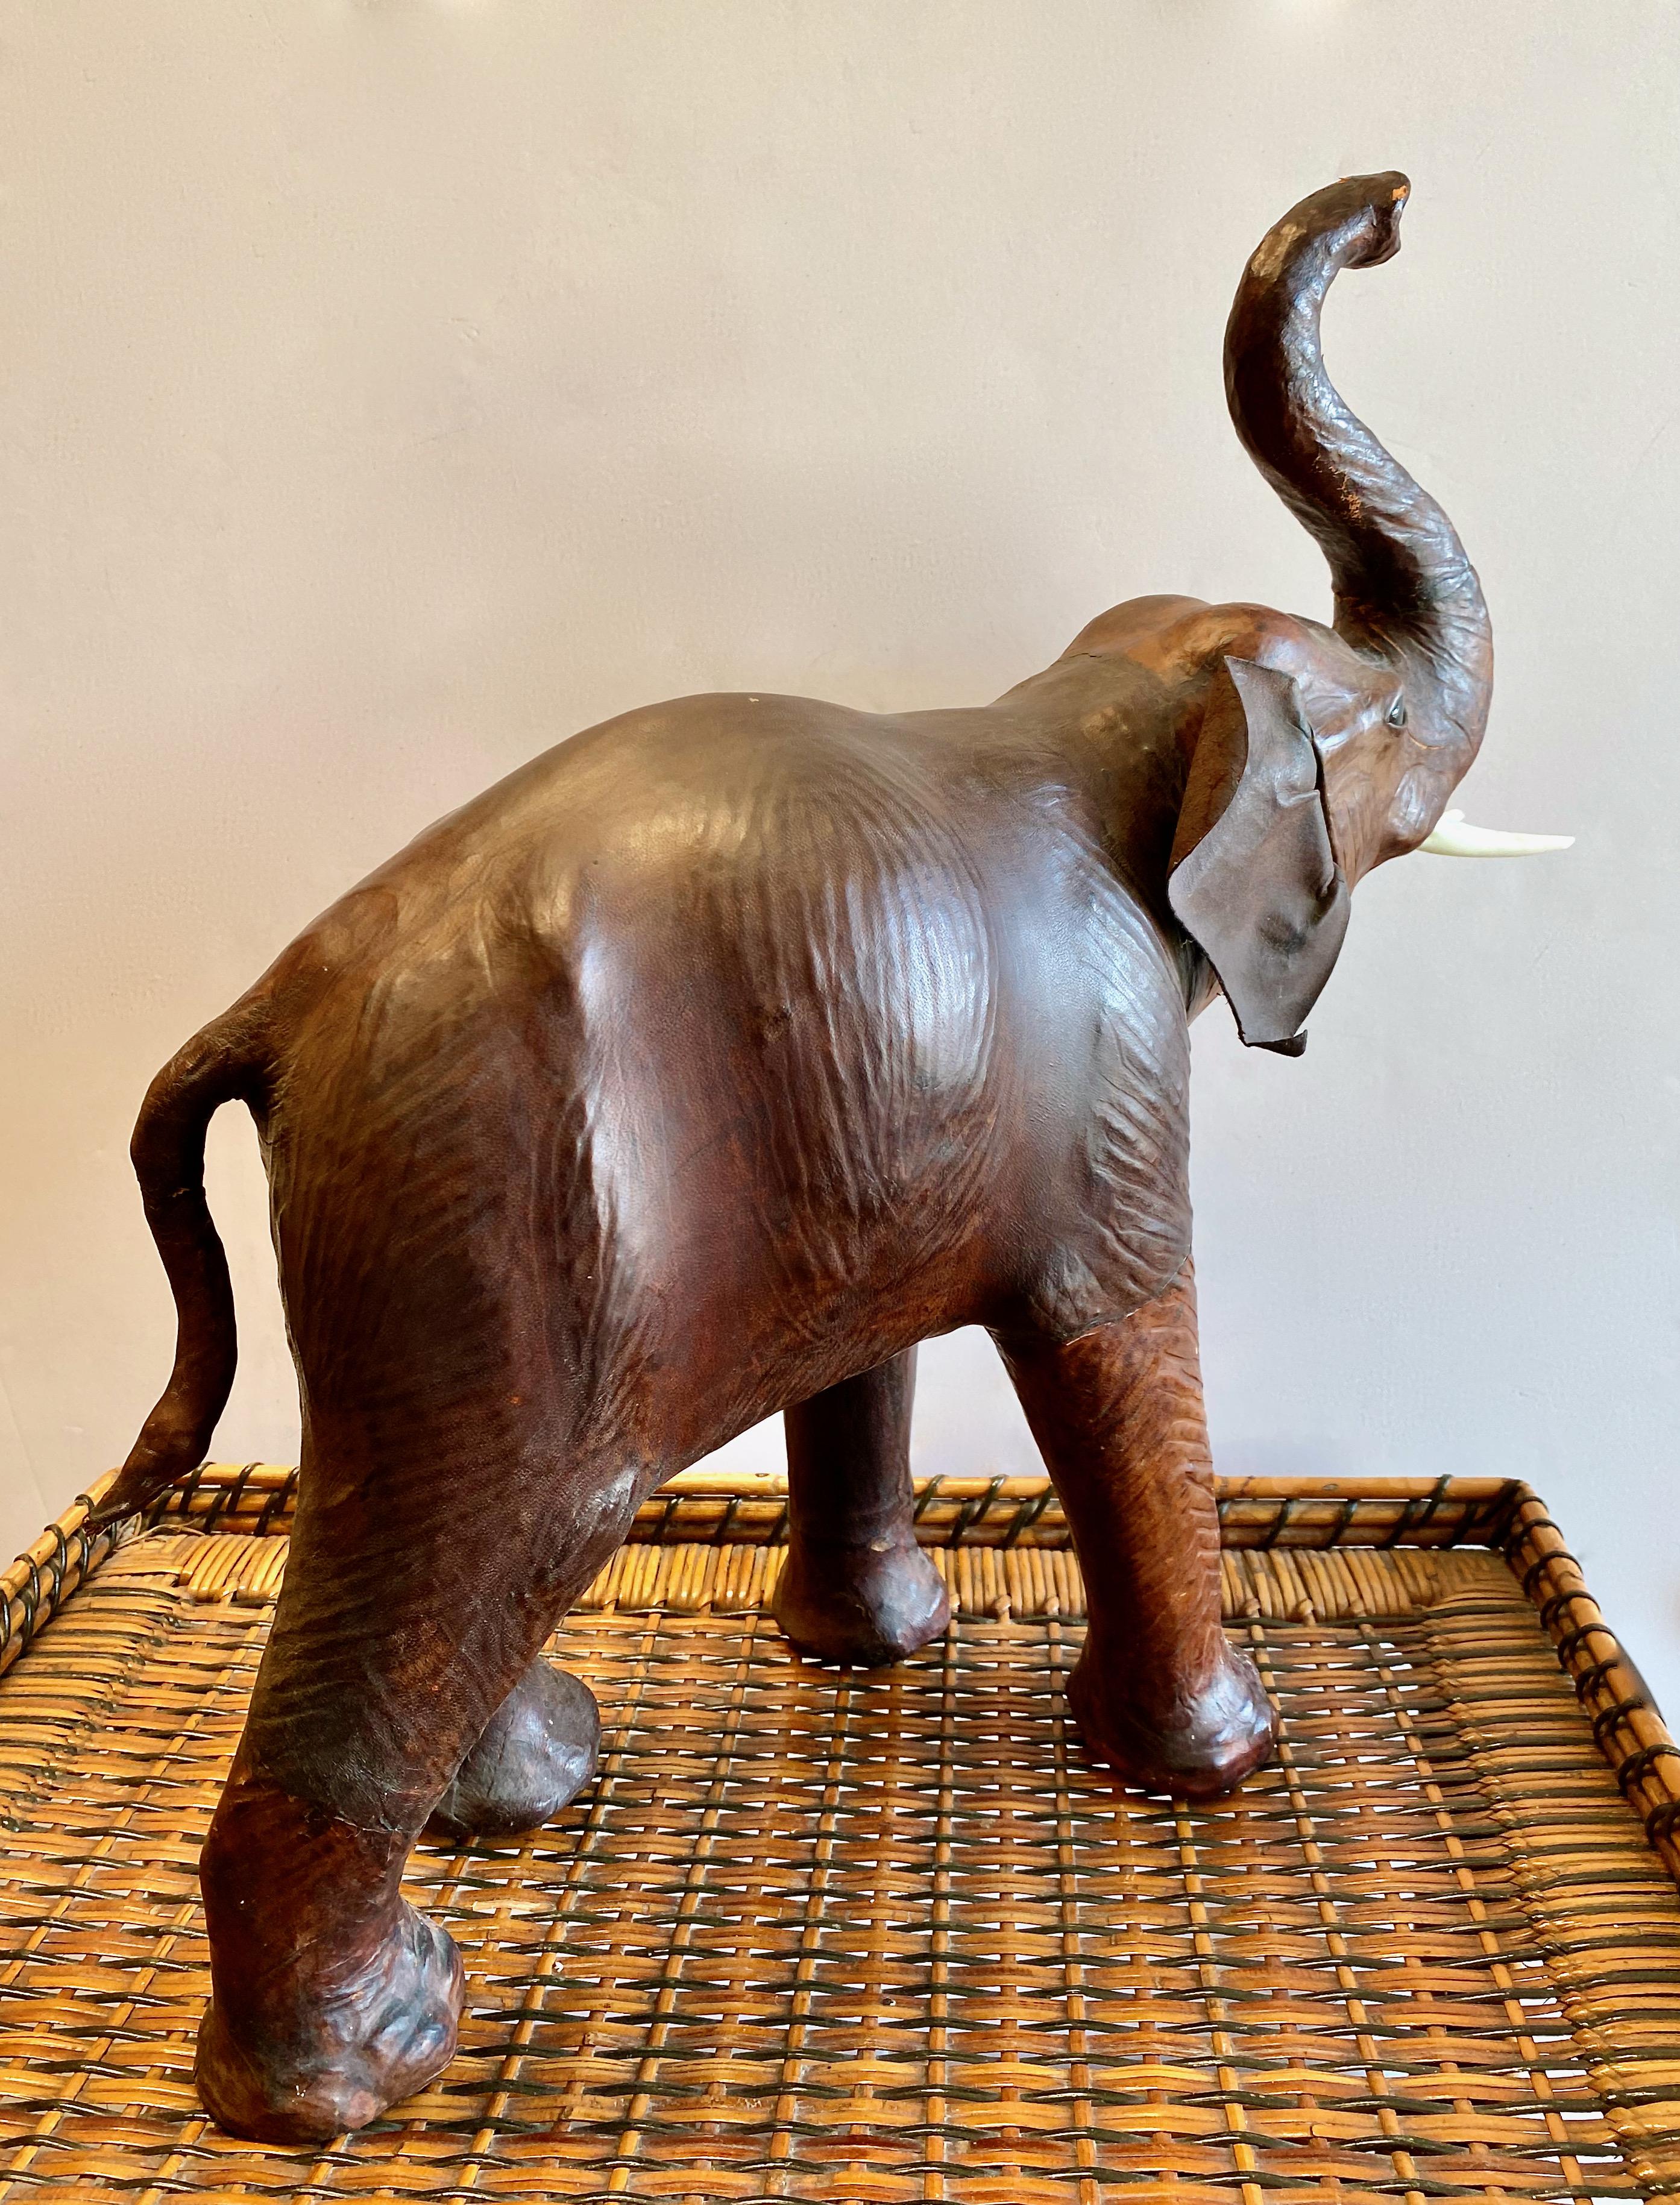 This is the second and slightly smaller of two c. 1950s leather clad elephants. This charming guy is in very good original condition--he maintains his original faux ivory tusks and leather. All elements appear to be original and he is without major